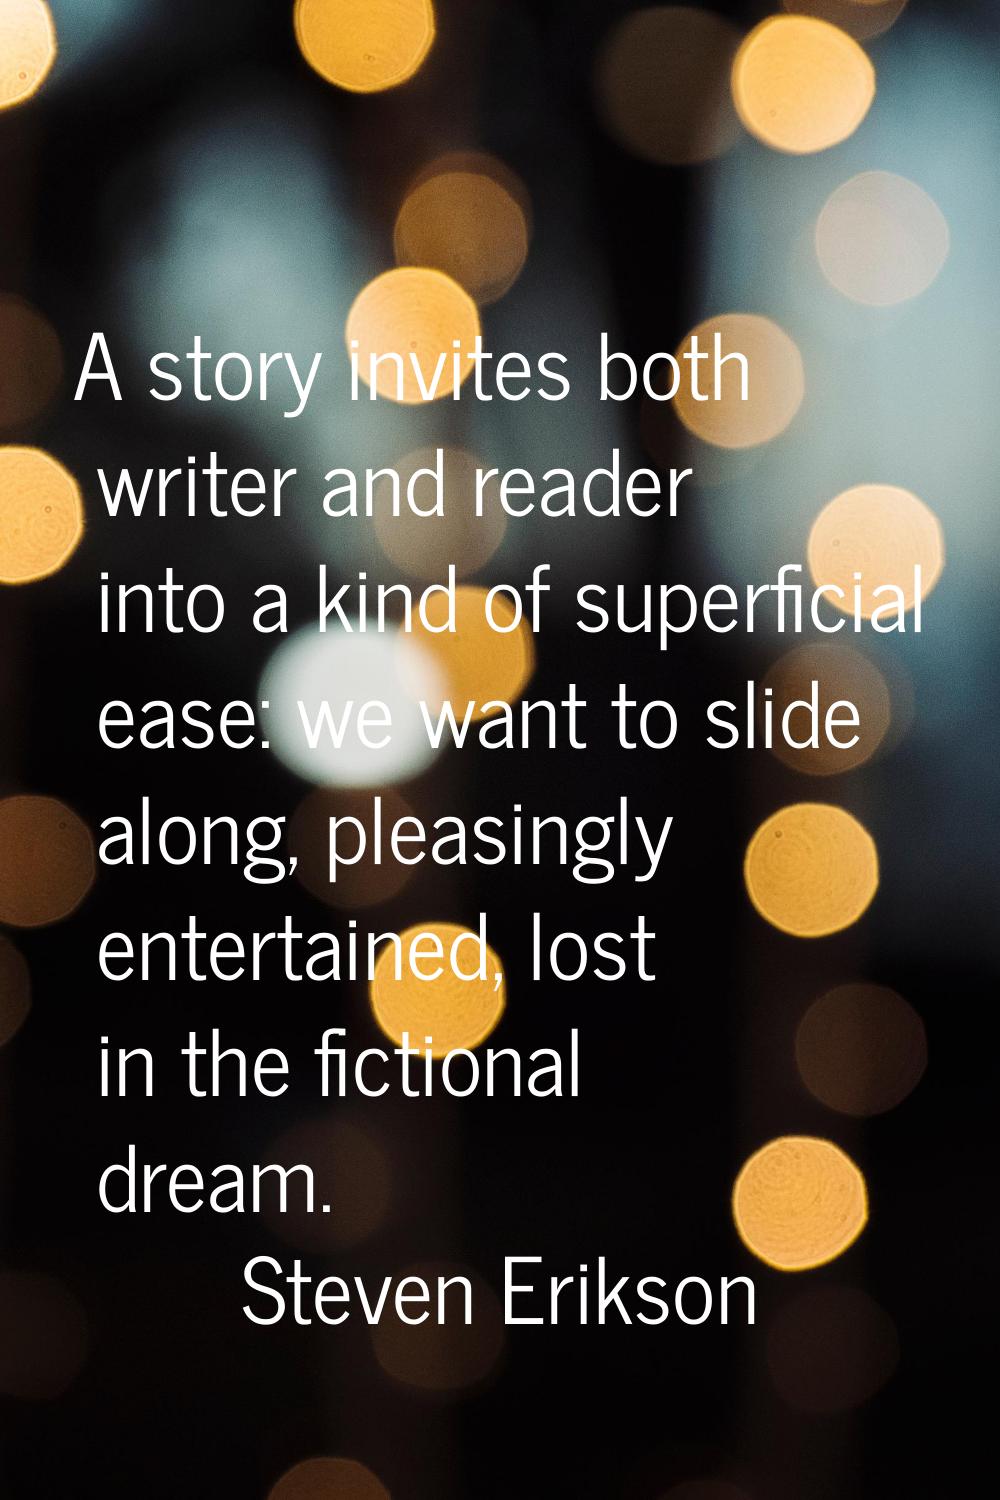 A story invites both writer and reader into a kind of superficial ease: we want to slide along, ple